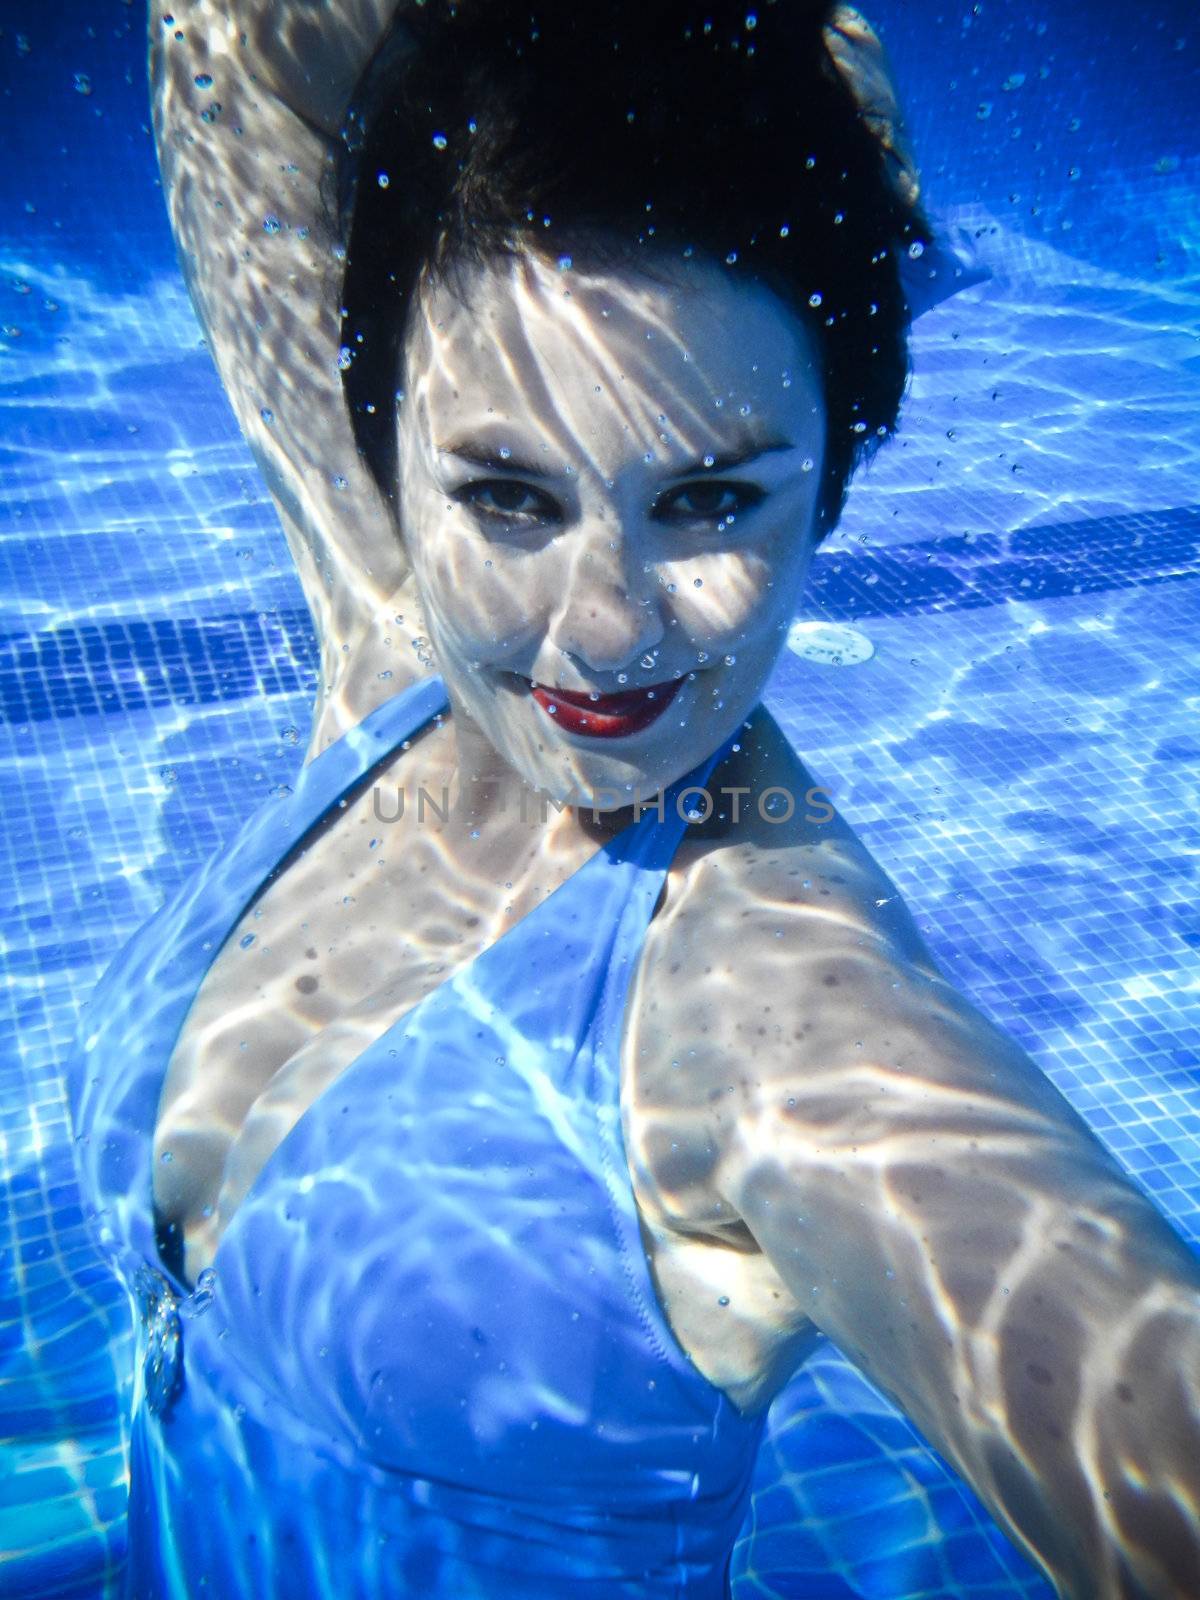 Vintage girl swimming and smiling underwater in a swimming pool by FernandoCortes